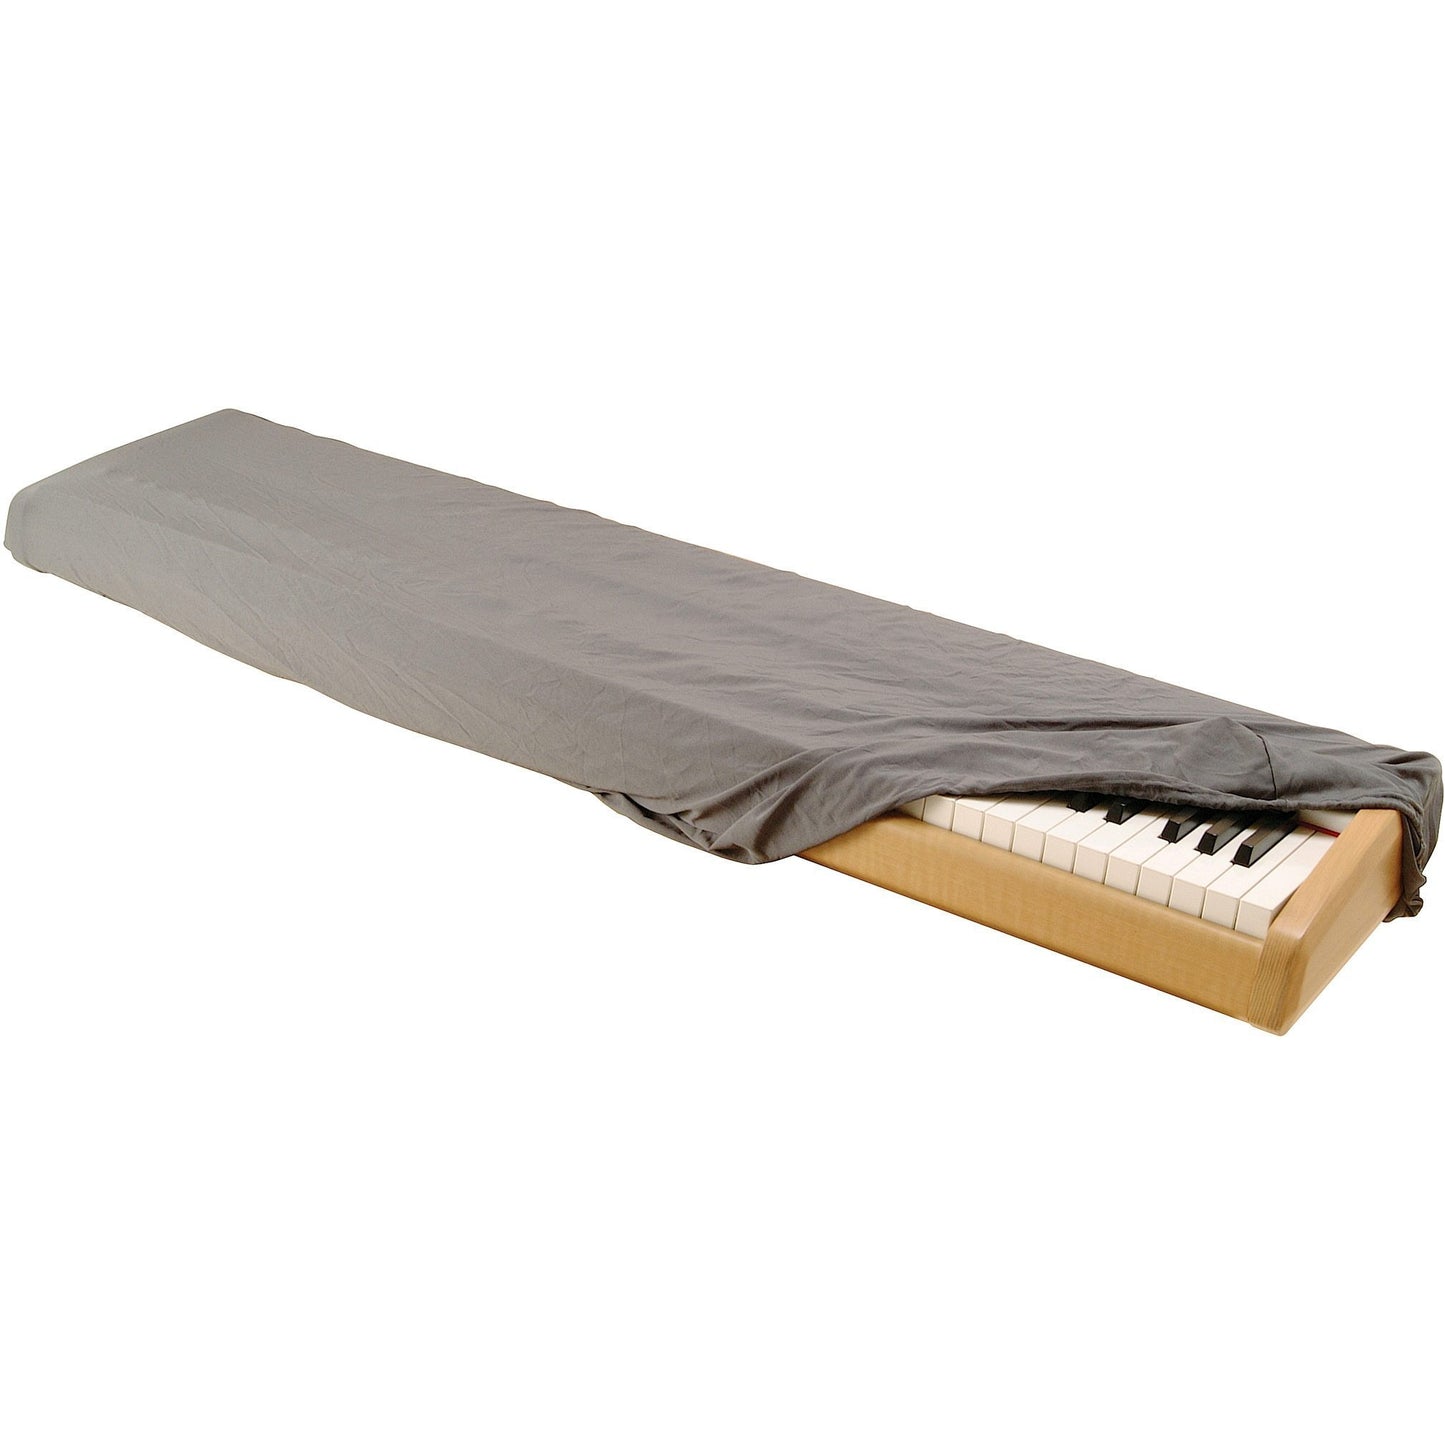 On-Stage KDA7088G Keyboard Dust Cover, Grey